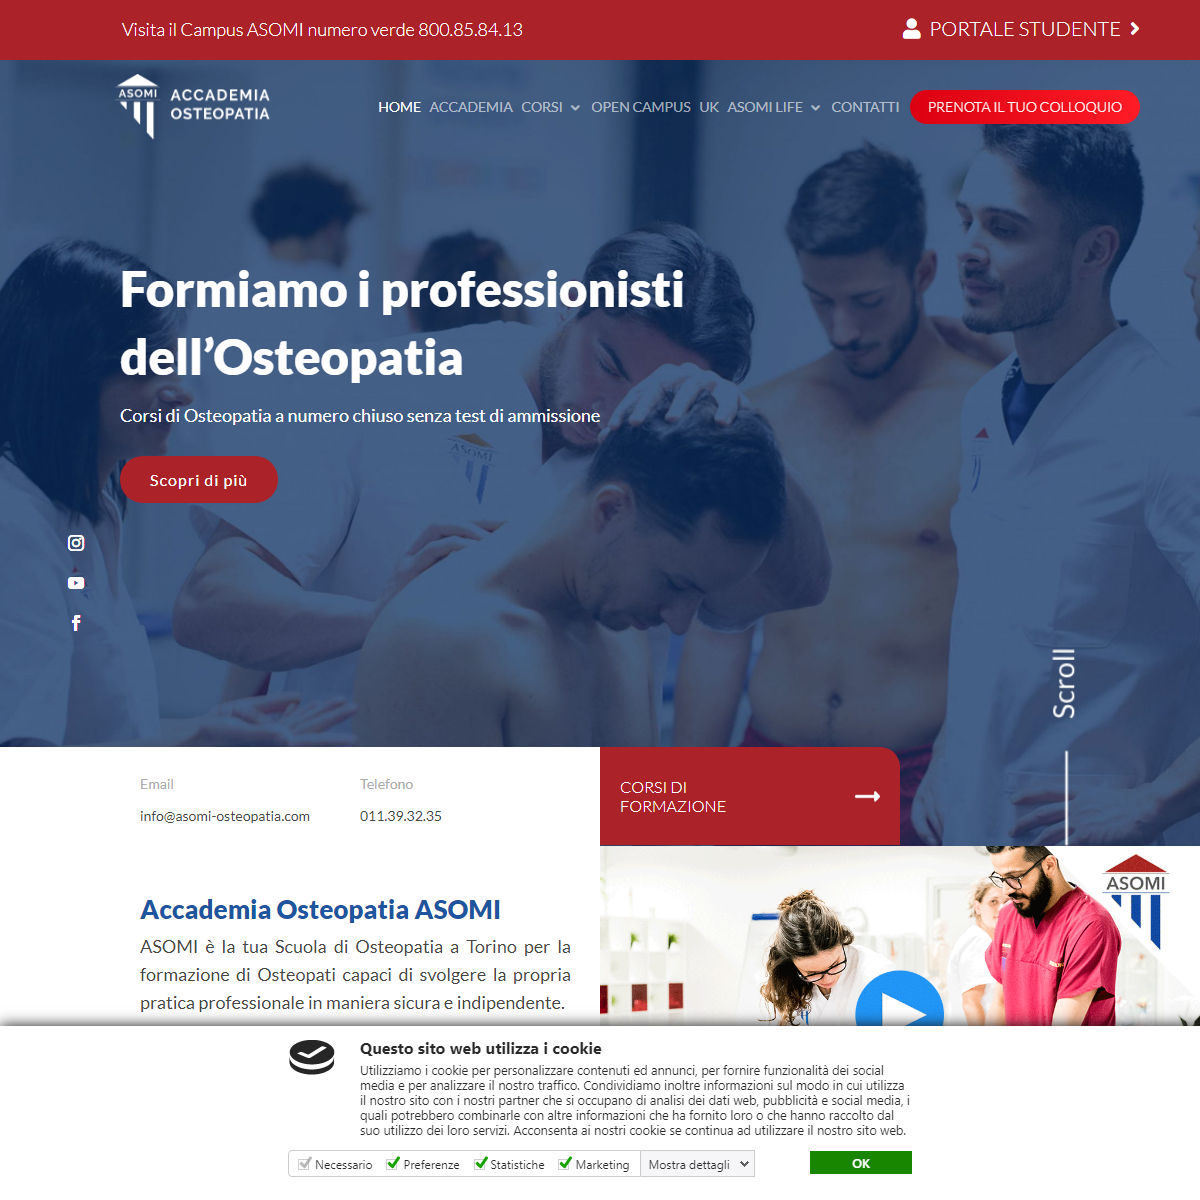 A complete backup of https://www.accademia-osteopatia.com/